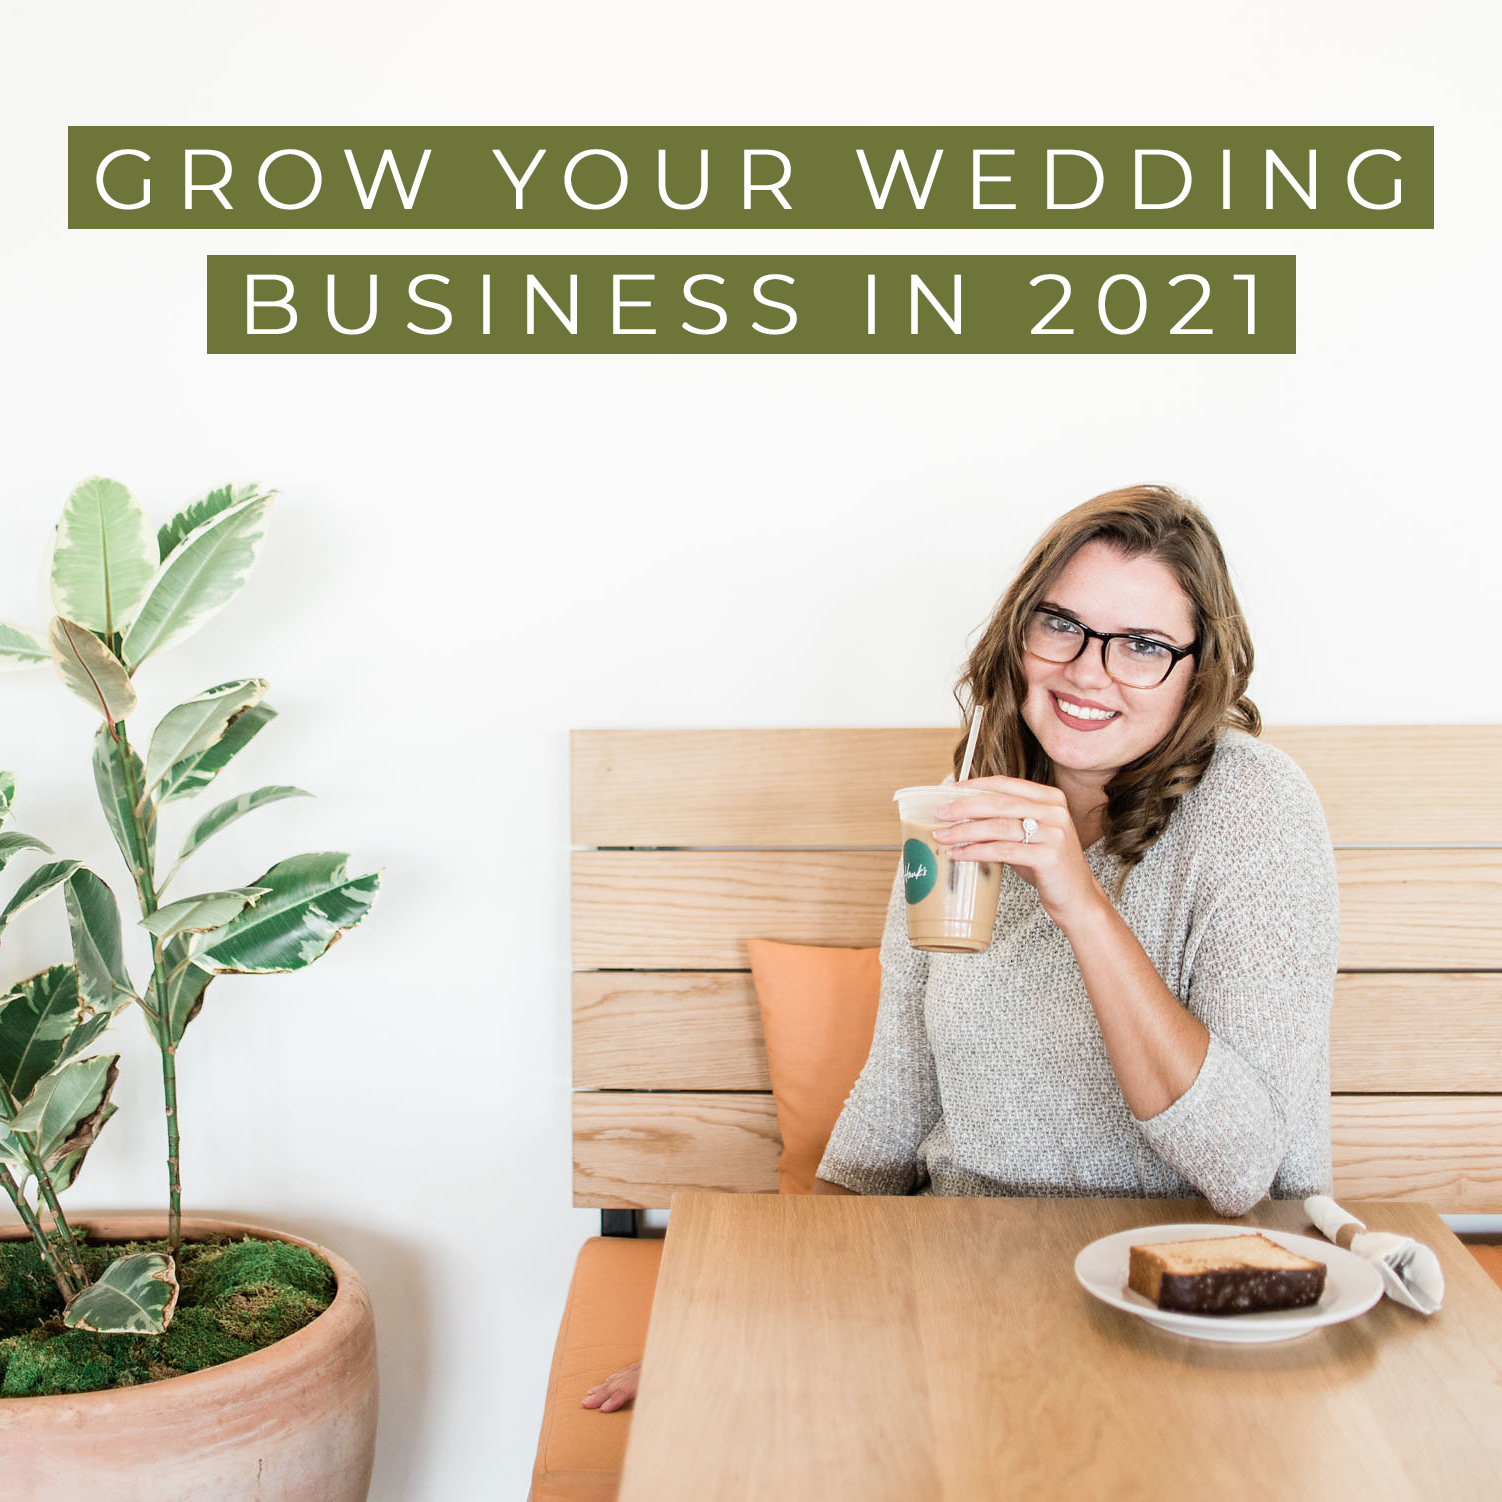 Grow your wedding professional business in 2021 with these three tips.